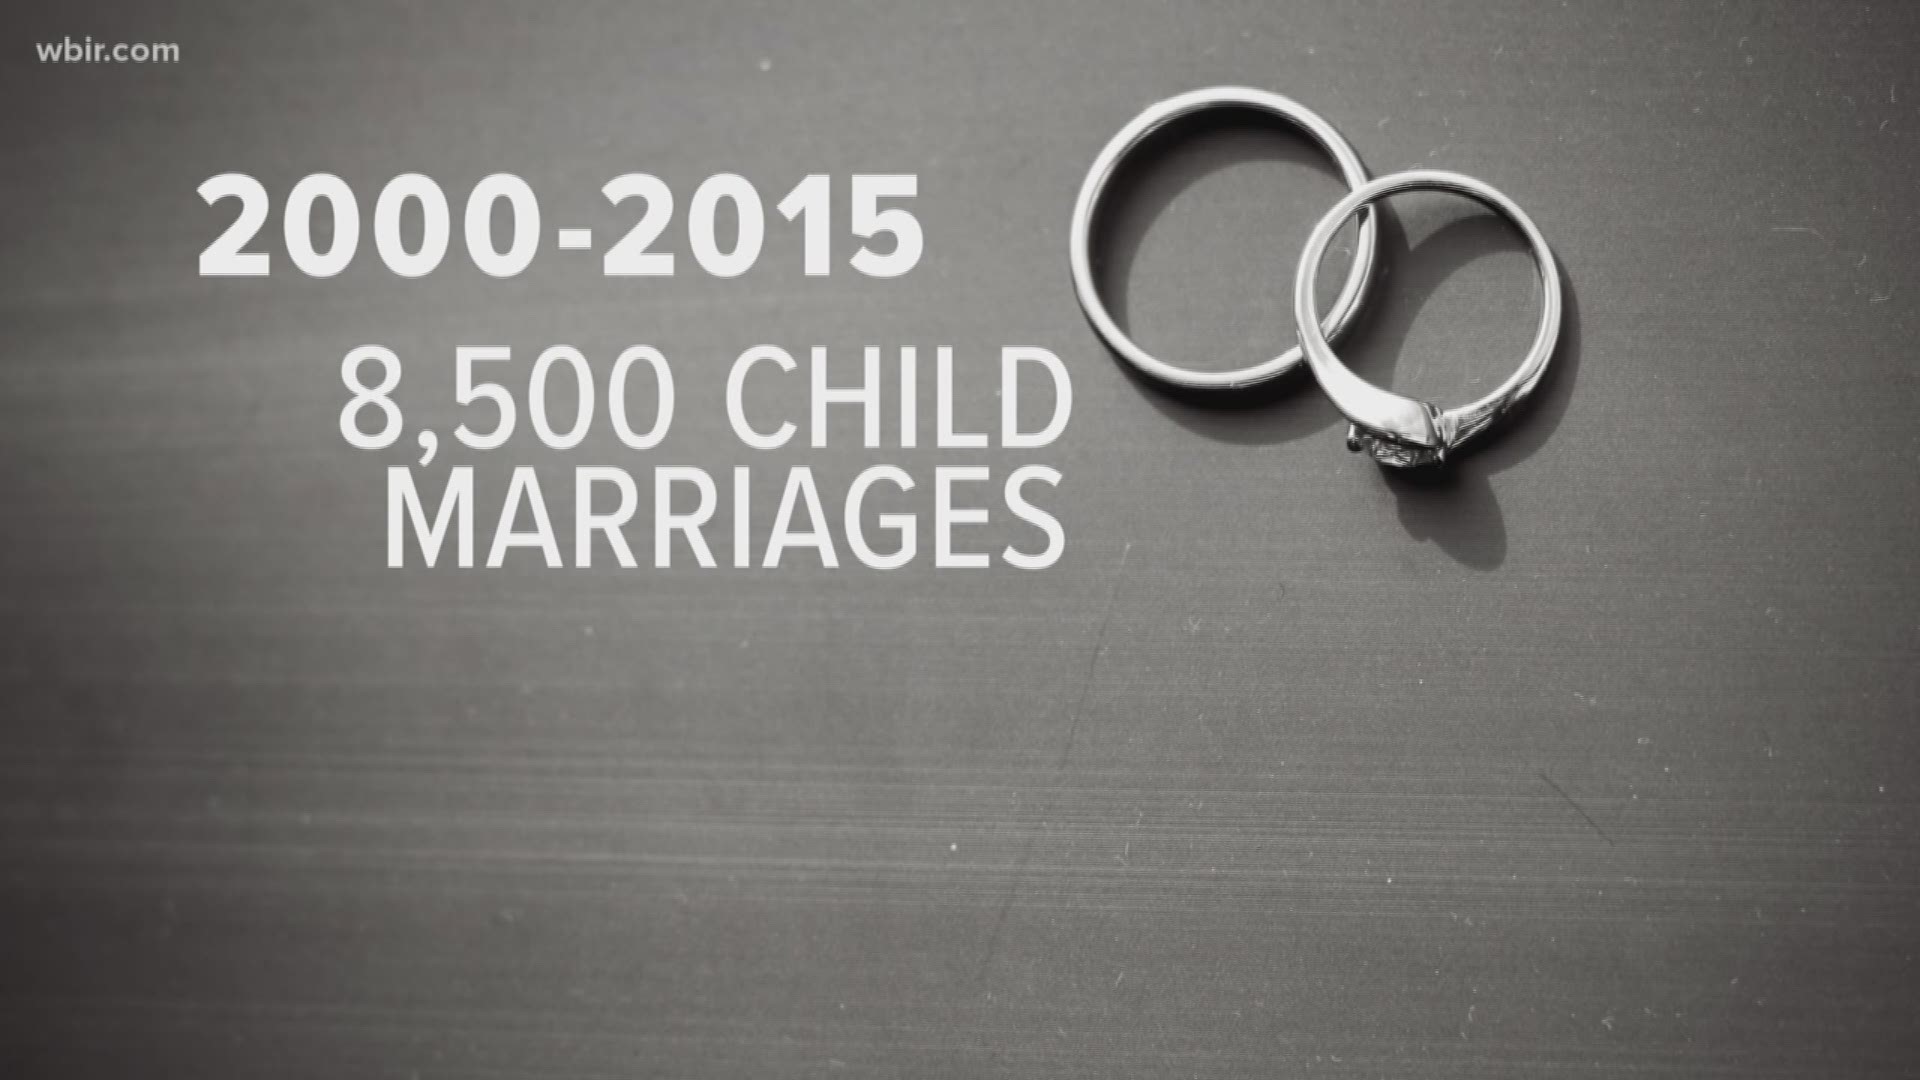 Feb. 27, 2018: Tennessee lawmakers are considering a bill that sets the minimum age limit as 18 to get married in Tennessee.